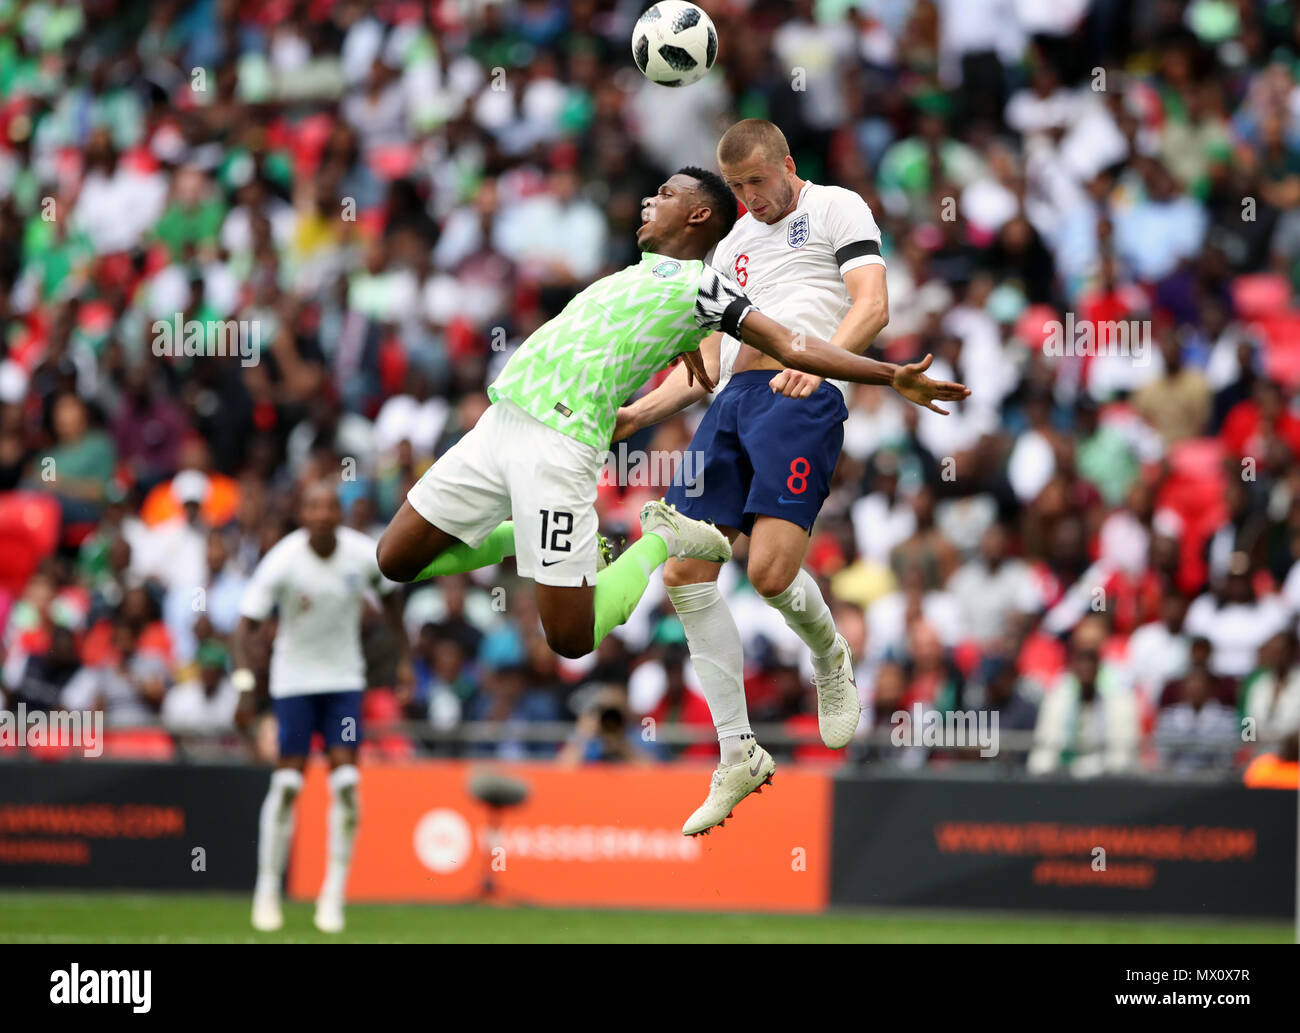 England's Eric Dier (right) and Nigeria's Shehu Abdullahi battle for the ball during the International Friendly match at Wembley Stadium, London. Stock Photo